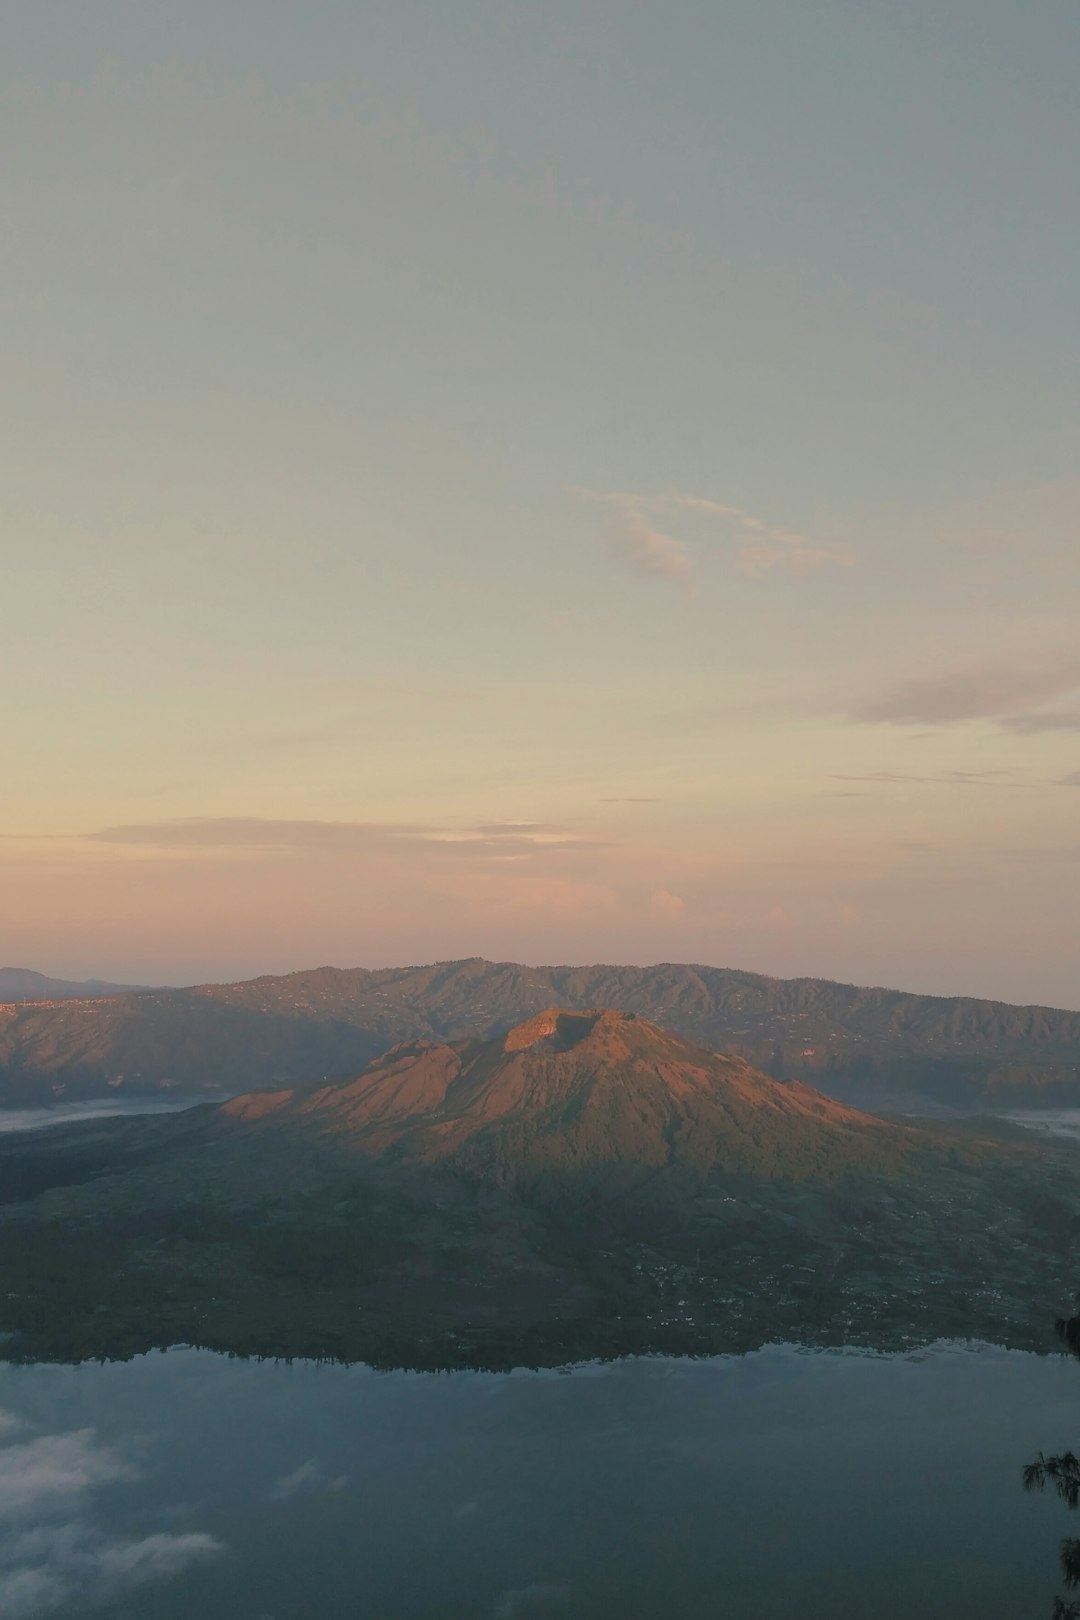 Travel Tips and Stories of Mount Batur in Indonesia